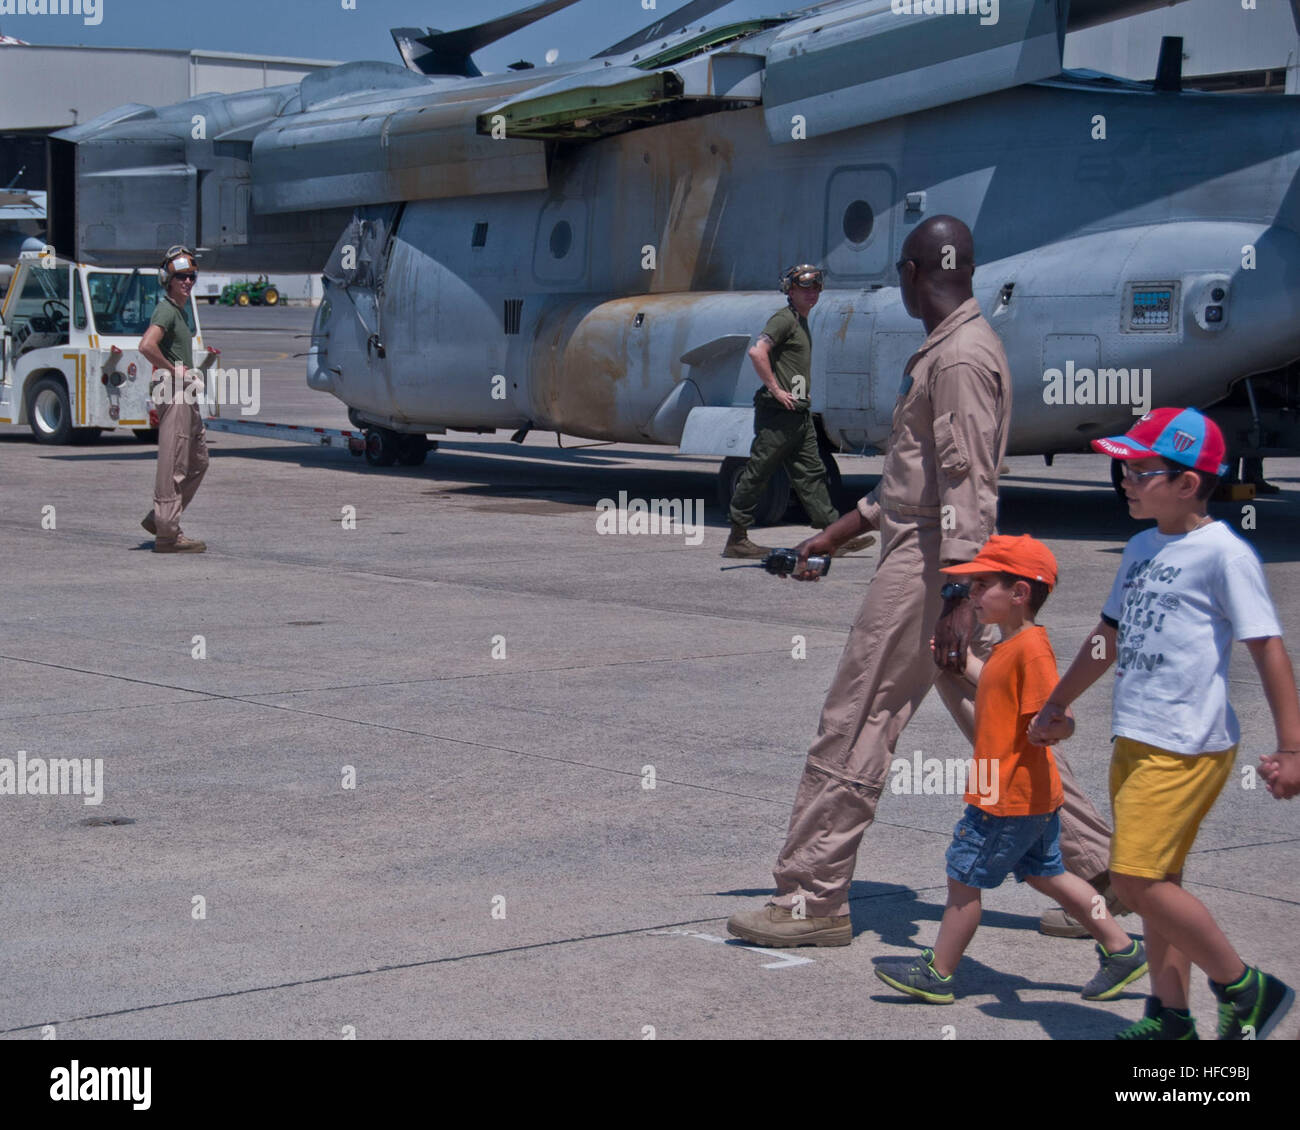 U.S. Marine Corps Capt. Kwabena Okyereboaten, Special-Purpose Marine Air-Ground Task Force Crisis Response air maintenance officer, leads students from the Belpasso Madre Teresa di Calcutta school around an MV-22B Osprey at Naval Air Station Sigonella, Italy, June 18, 2013. The students toured NAS Sigonella and thanked the Marines and Sailors from Special-Purpose MAGTFs Africa and Crisis Response for moving and delivering more than 650 boxes of paper from the Navy Exchange Depot to the elementary school last month as part of the NAS Sigonella community relations initiative. (U.S. Navy photo by Stock Photo